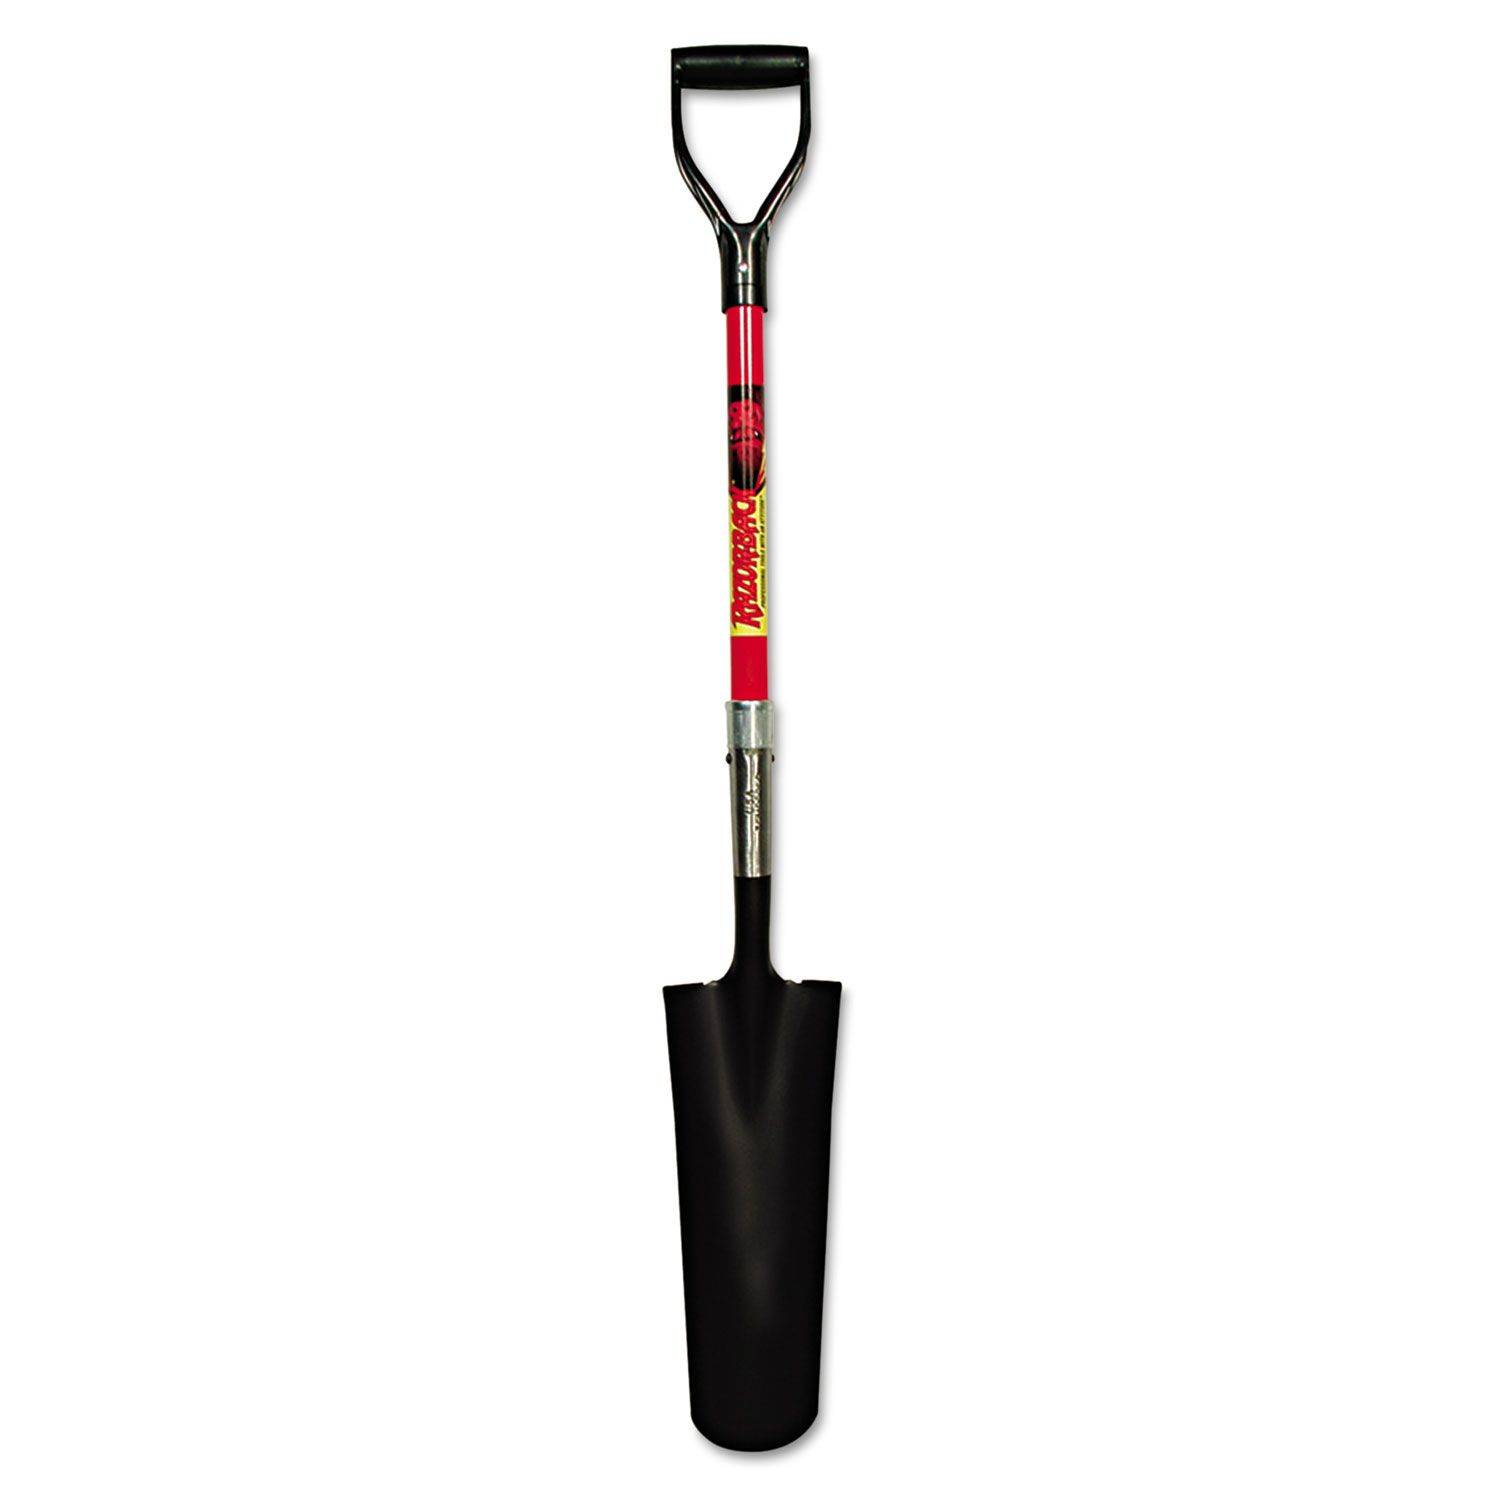 16in Drain Spade With Fiberglass Handle And Cushion D-Grip